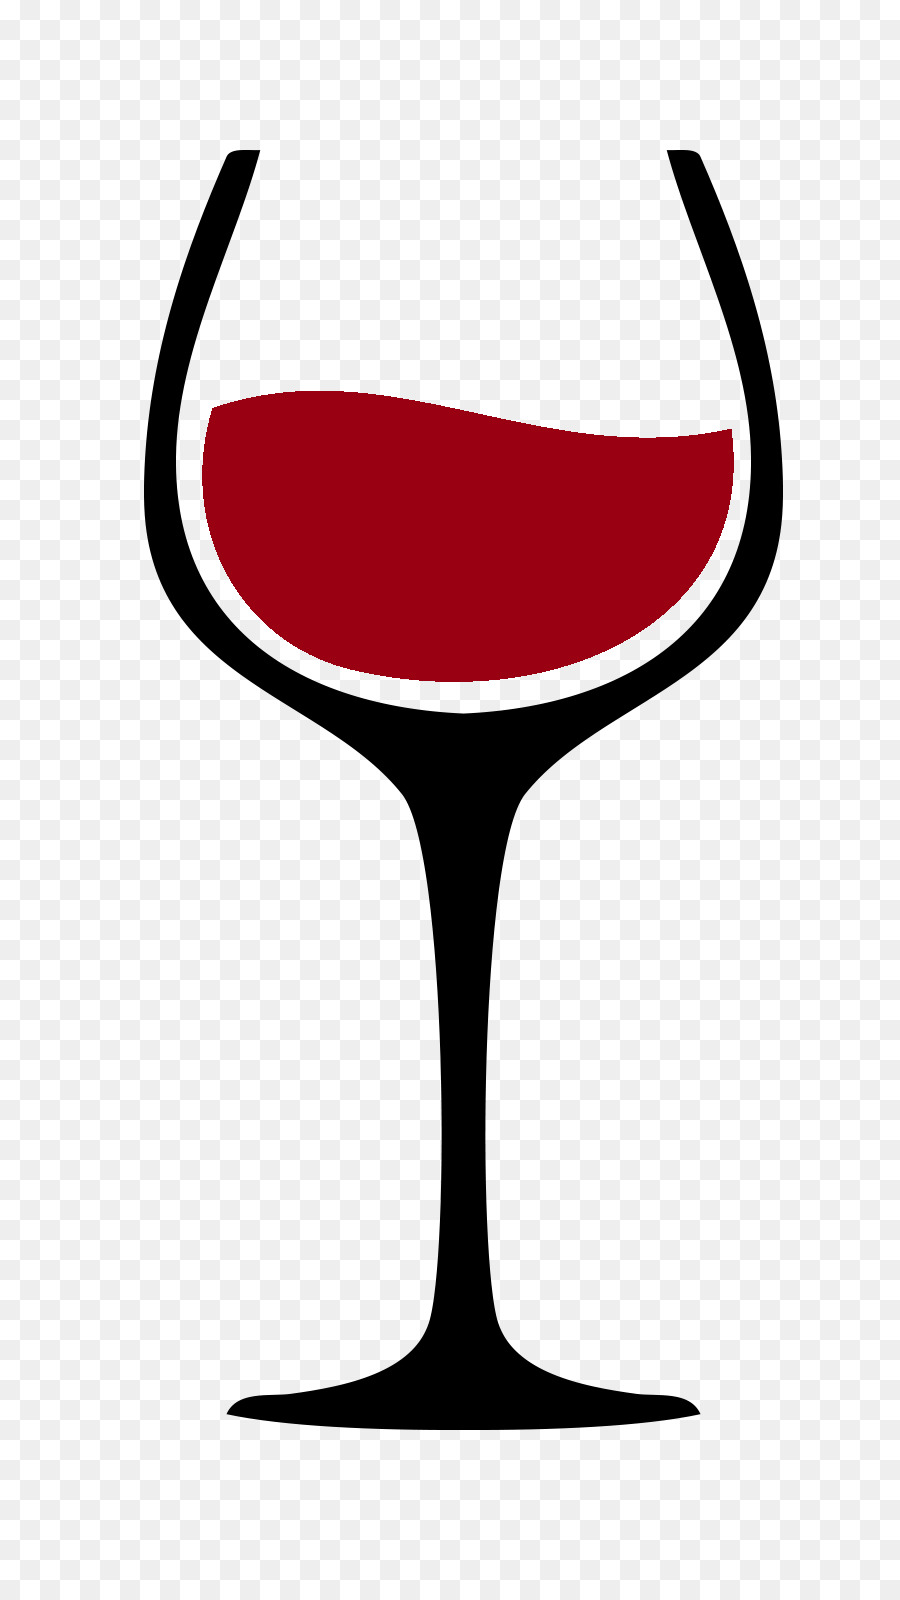 Minnie Mouse Mickey Mouse Wine glass Clip art - minnie mouse png download - 800*1600 - Free Transparent Minnie Mouse png Download.